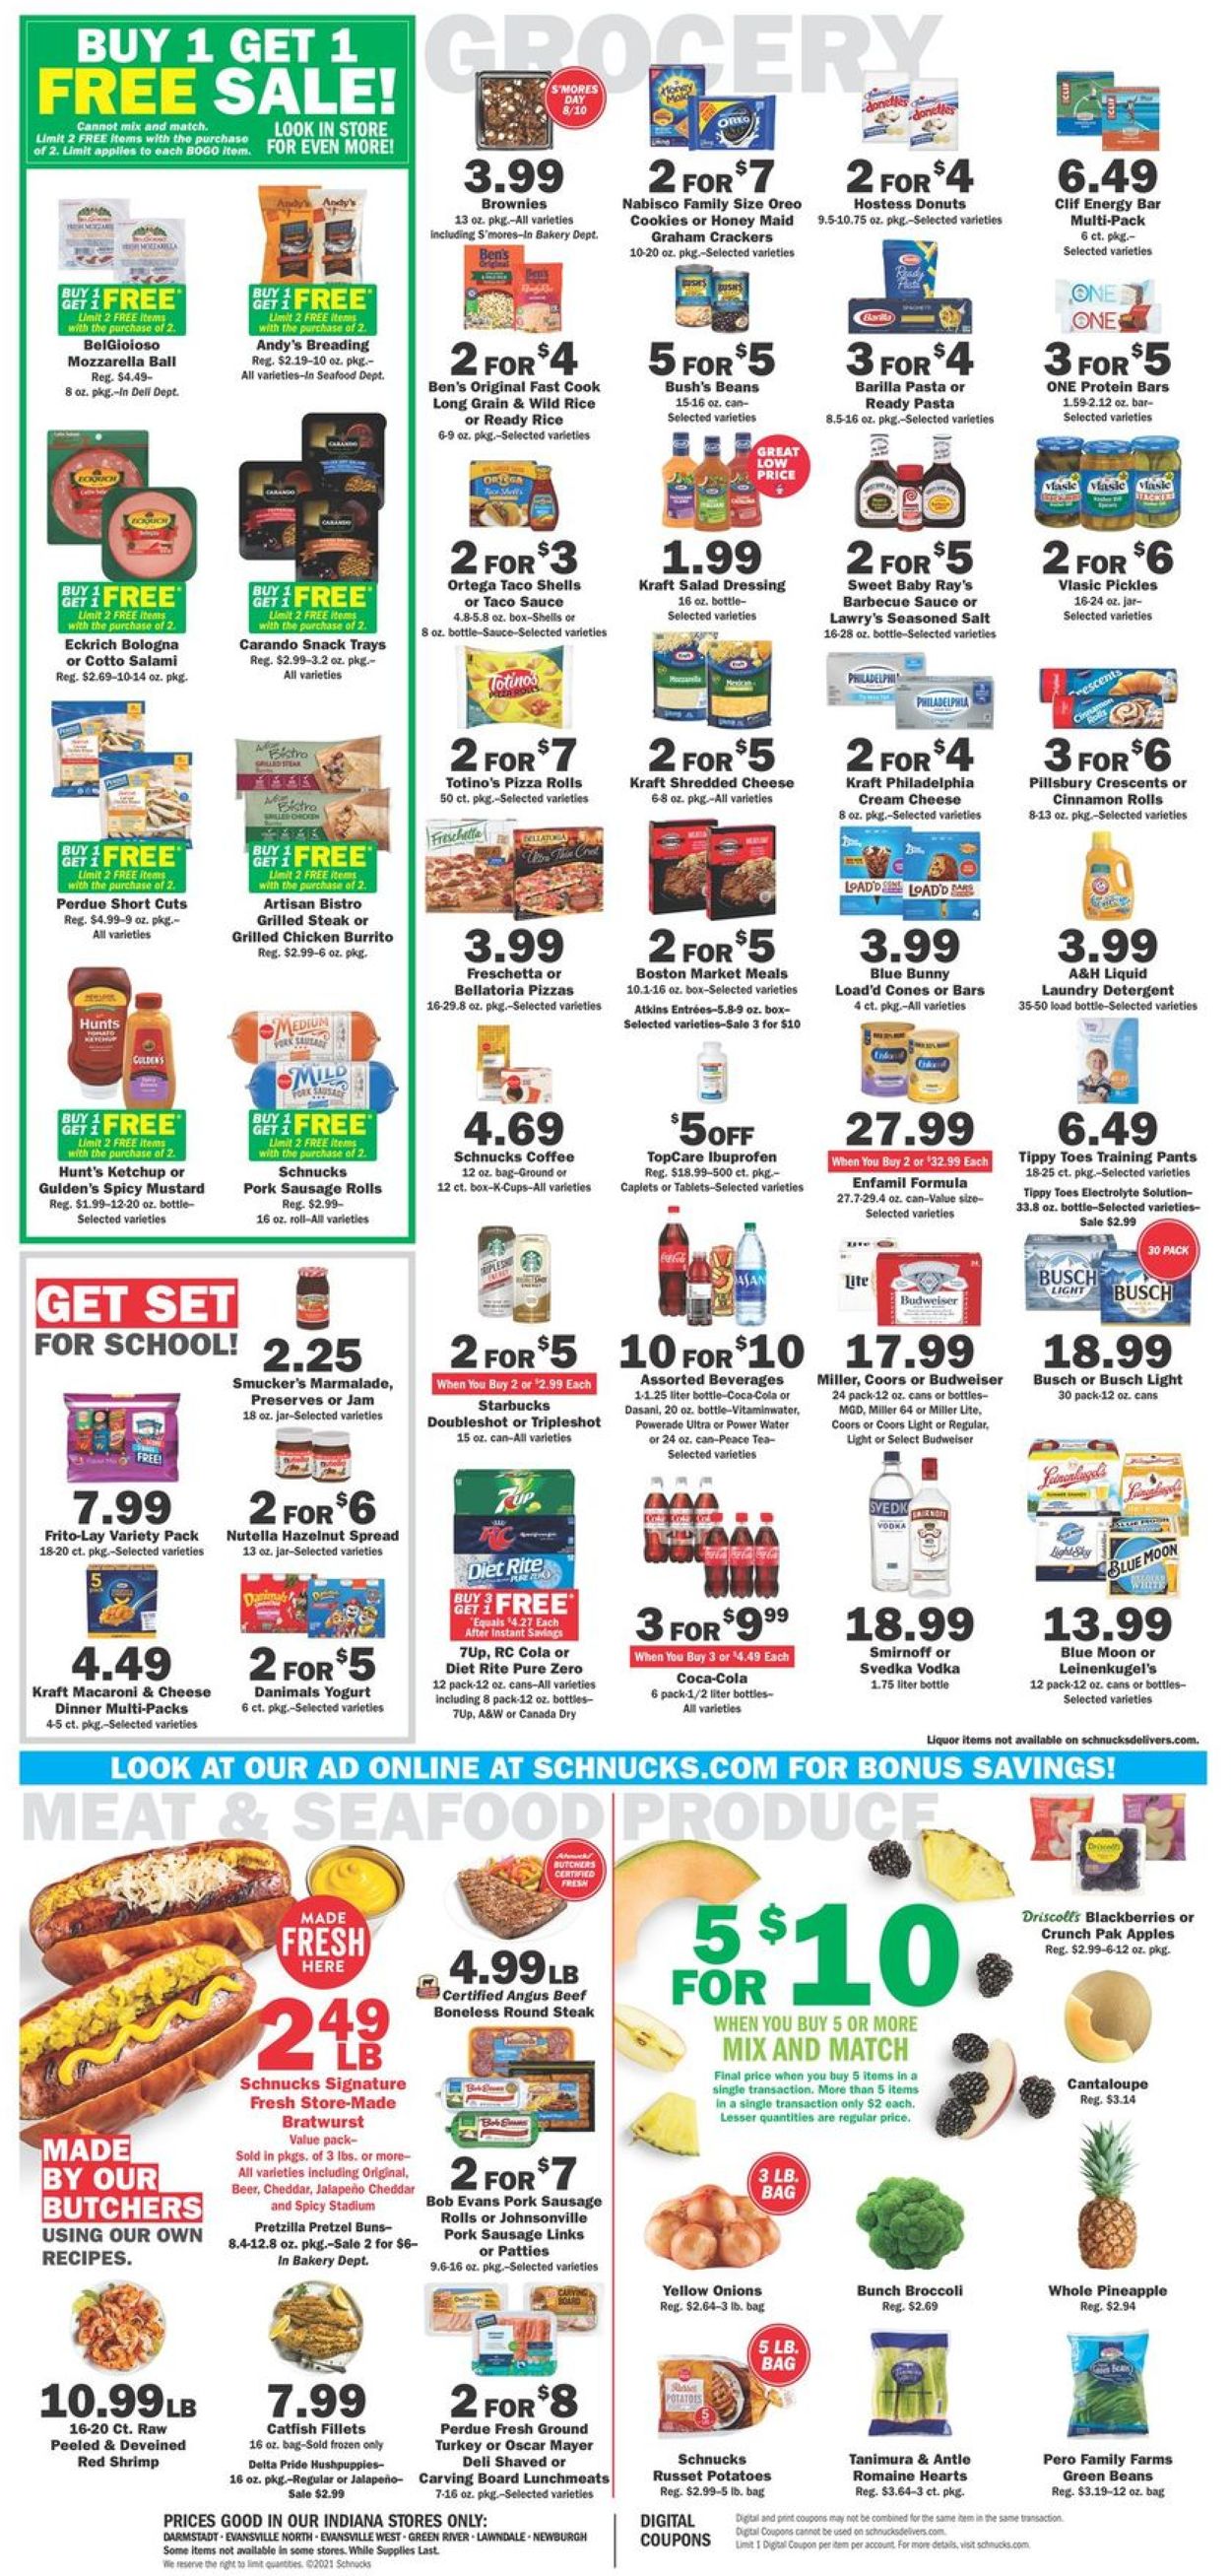 Schnucks Current weekly ad 08/04 - 08/10/2021 [2] - frequent-ads.com